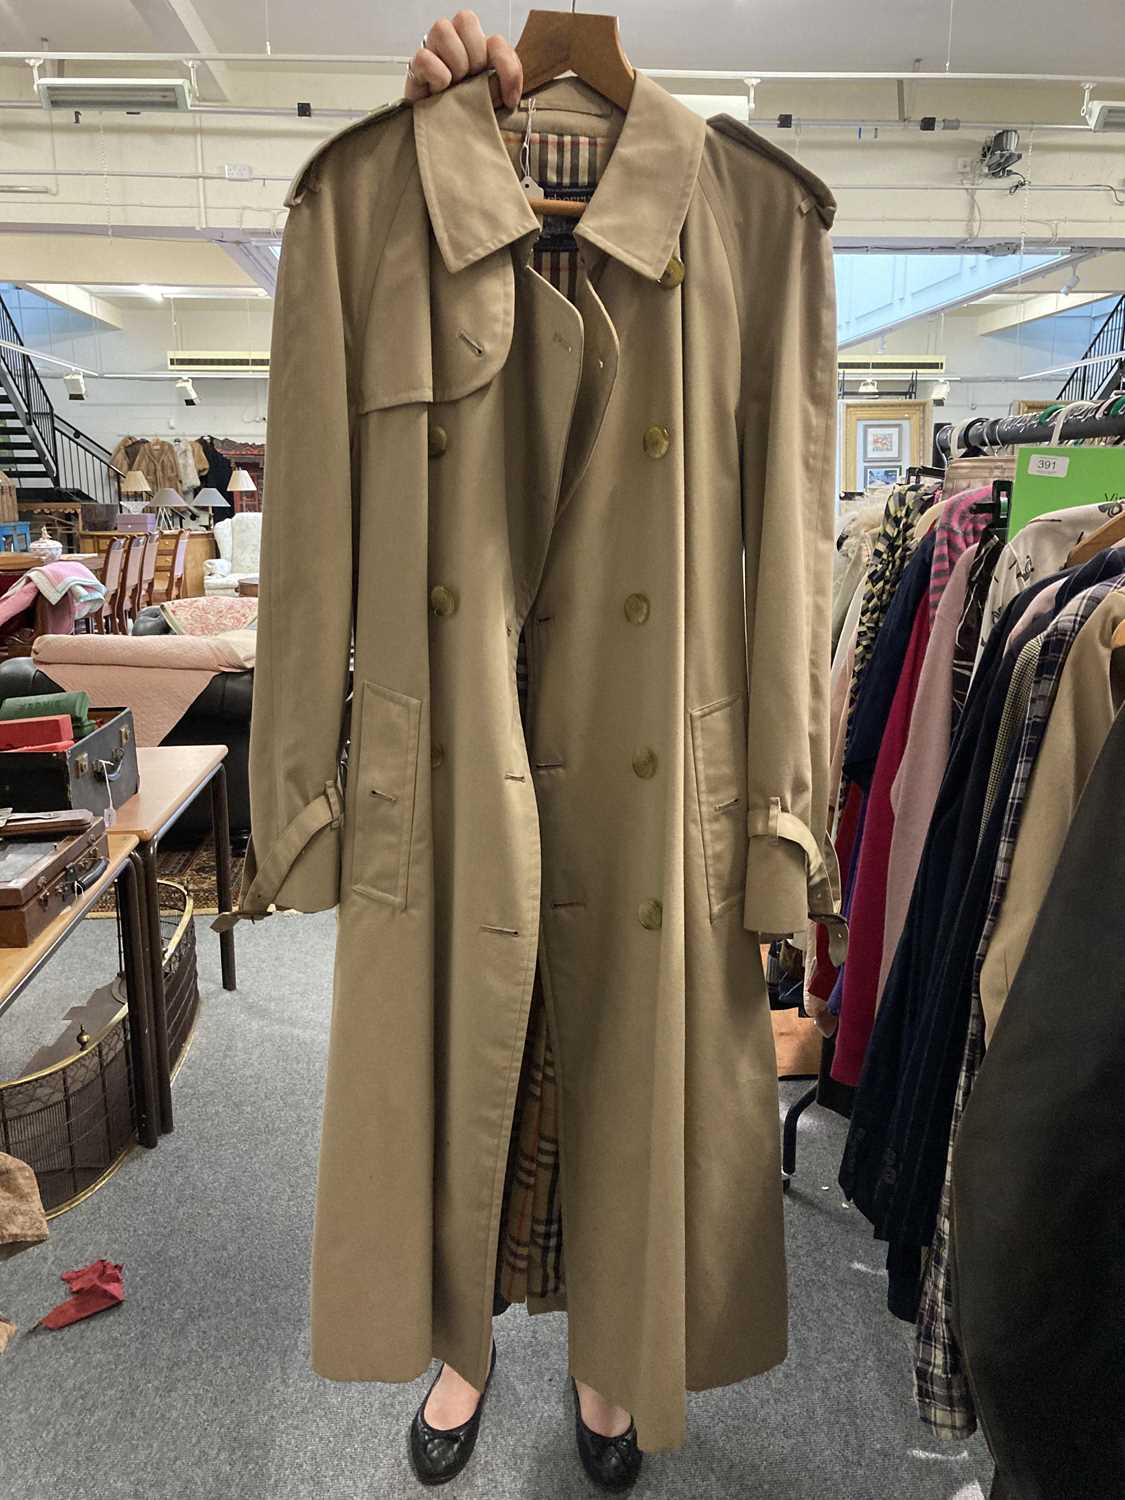 Ralph Lauren Black Trench Coat with button fastening, belt tie, side pockets (size 44 R), and a - Image 4 of 5